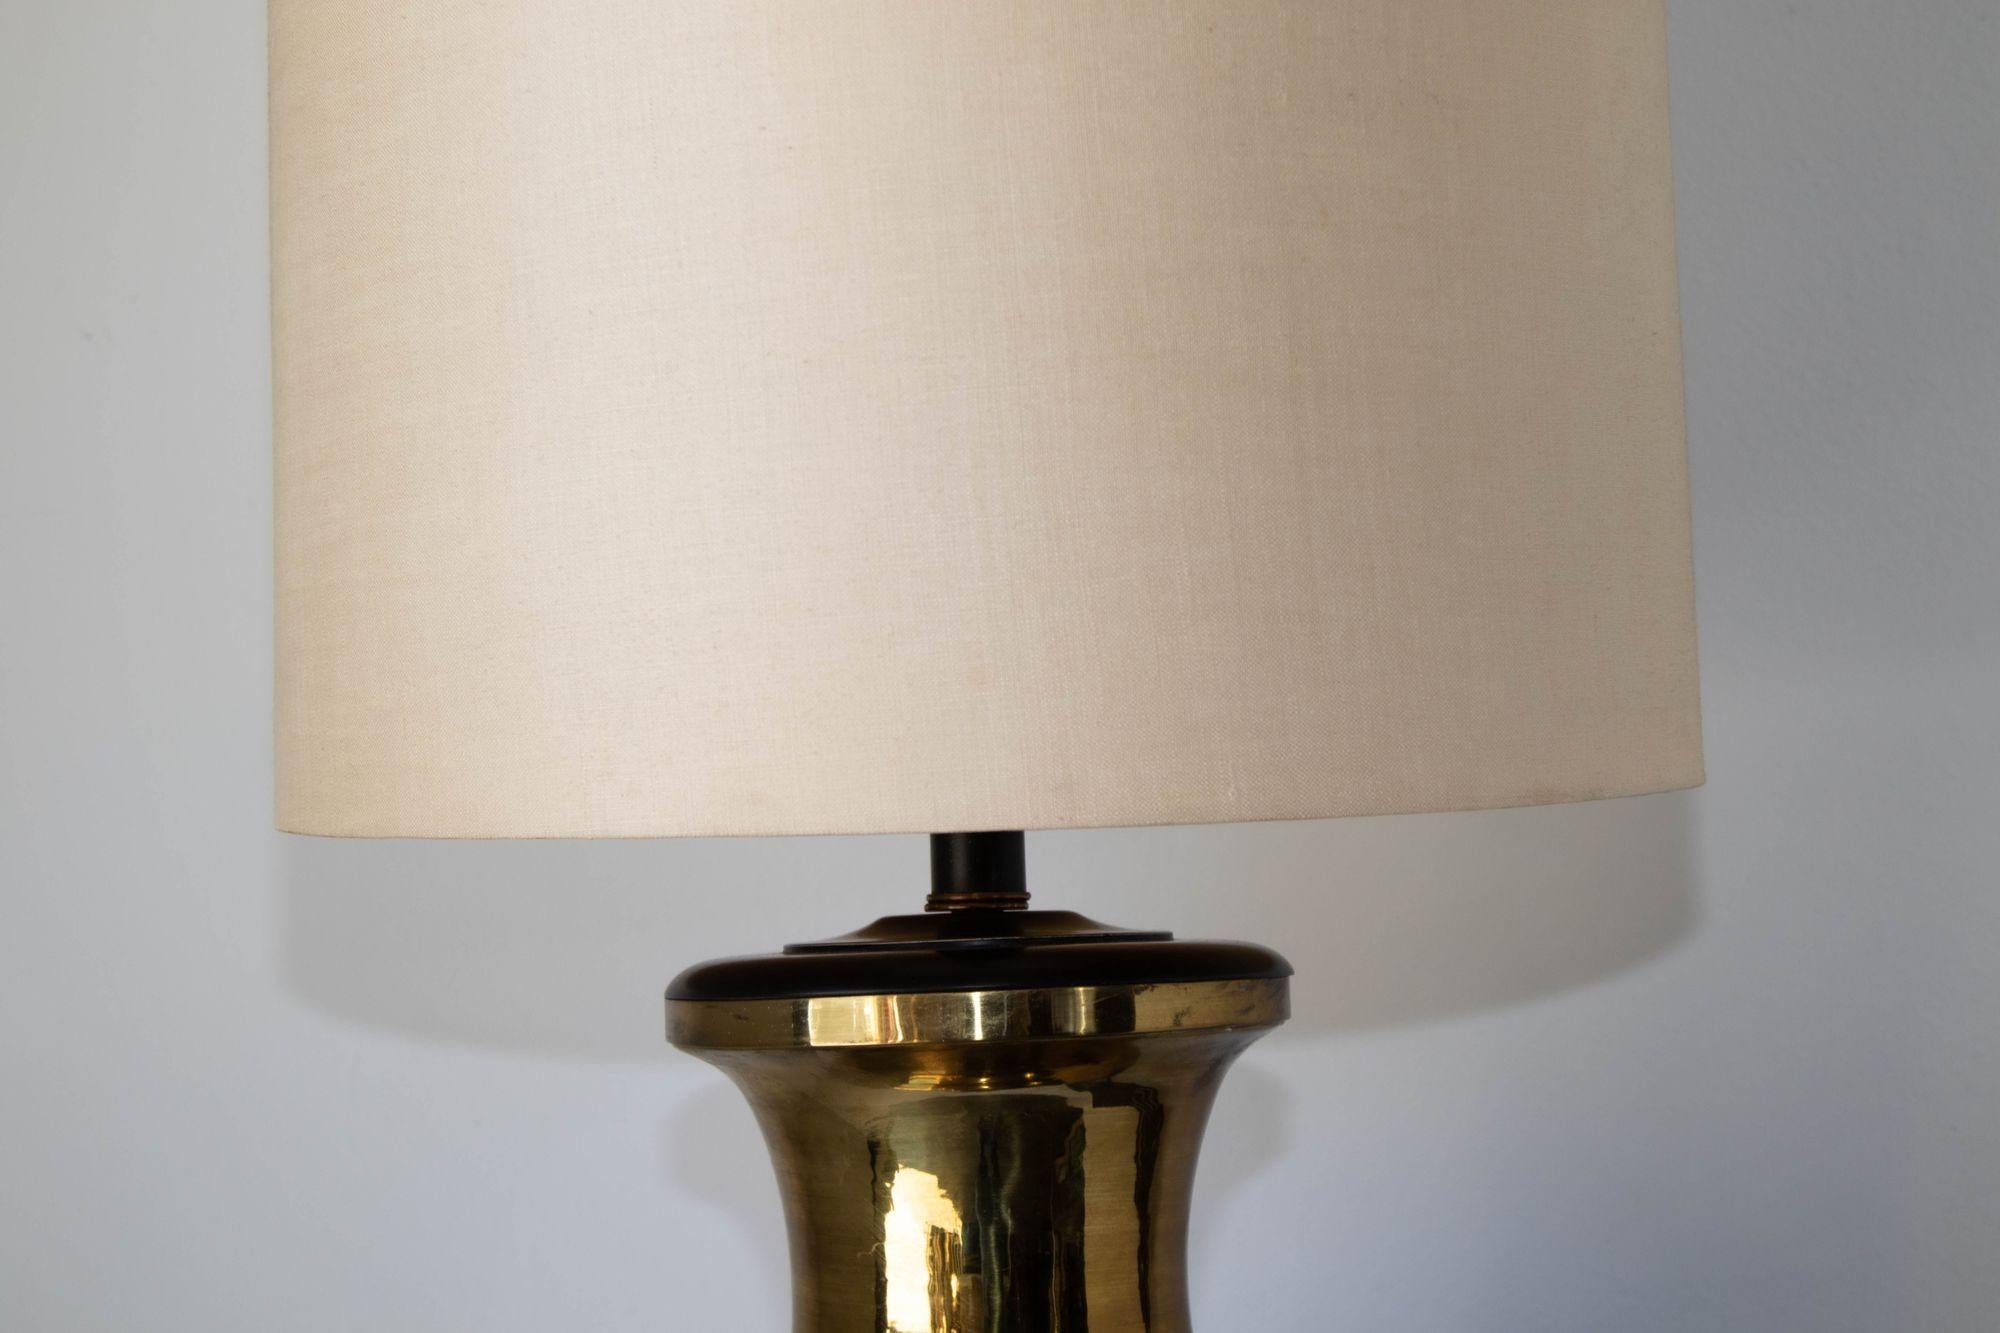 20th Century Mid-Century Modern Polished Brass Large Scale Chinoiserie Urn Table Lamp, 1950 For Sale